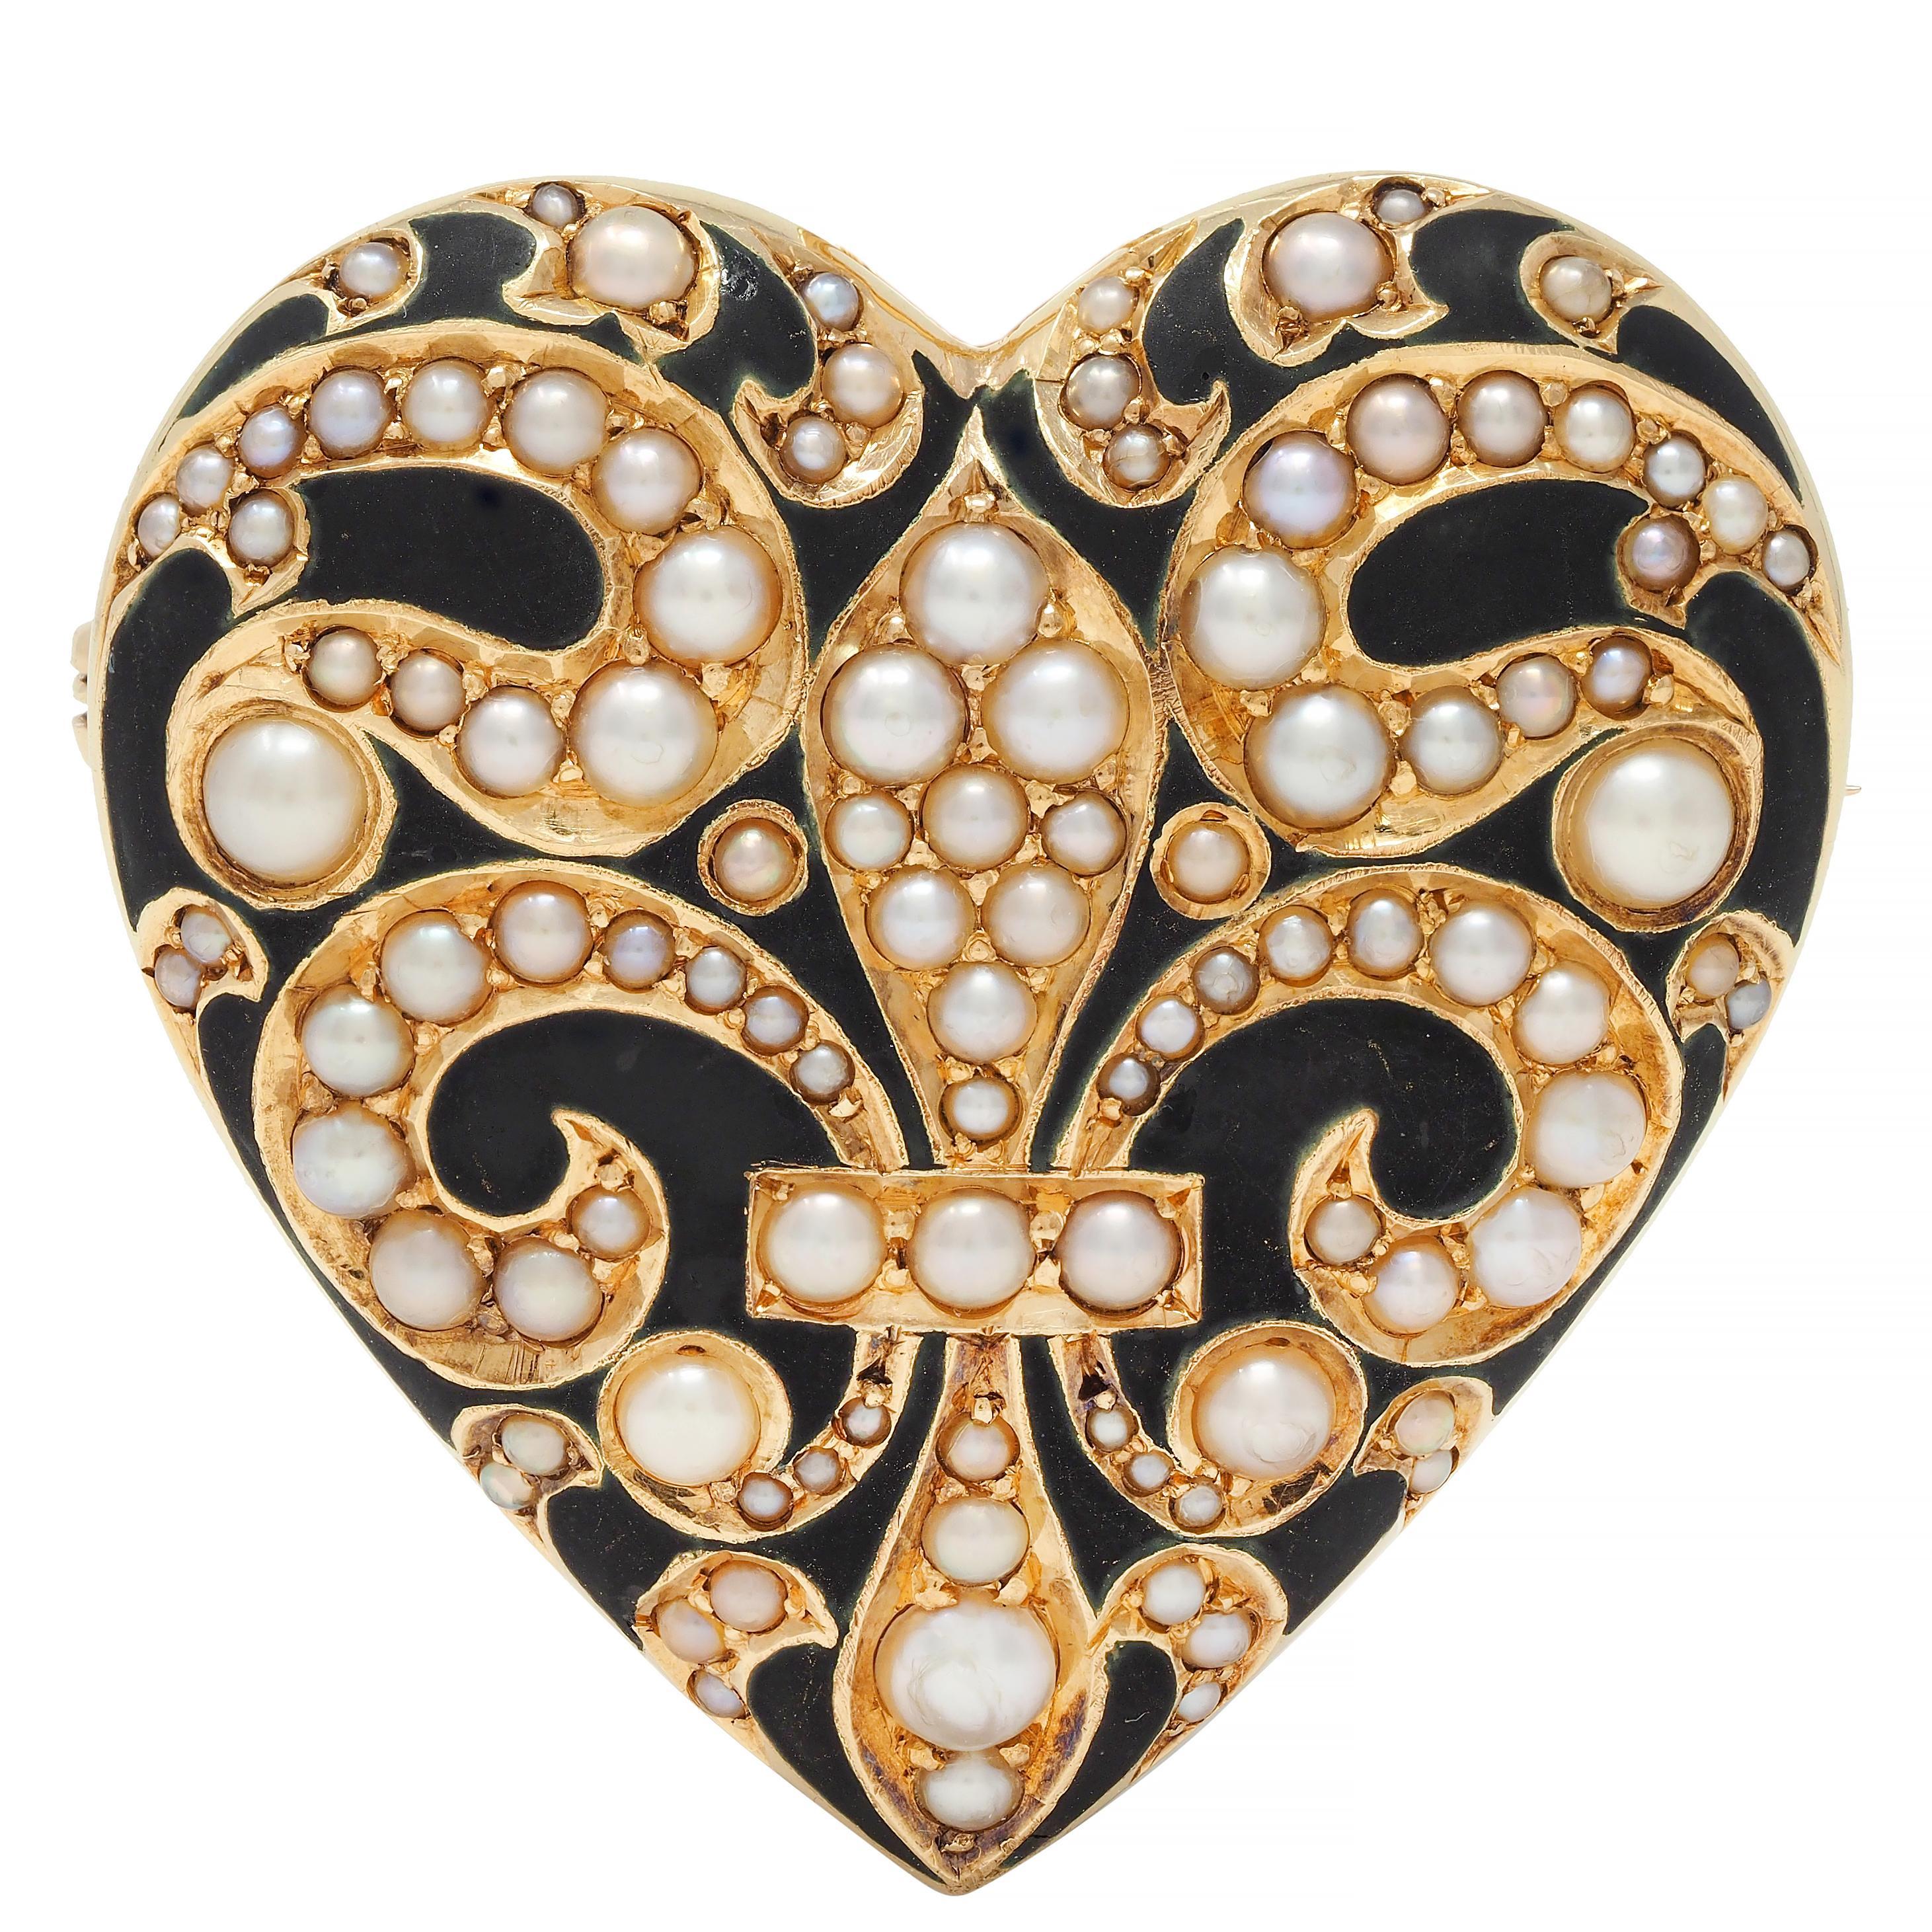 Designed as a puffed heart-shaped form with a grooved swirl fleur-de-lis motif pattern
Featuring 1.0 to 3.0 mm round seed pearls bead set throughout pattern
White to gray in body color with strong iridescence 
Accented by opaque matte black enamel -